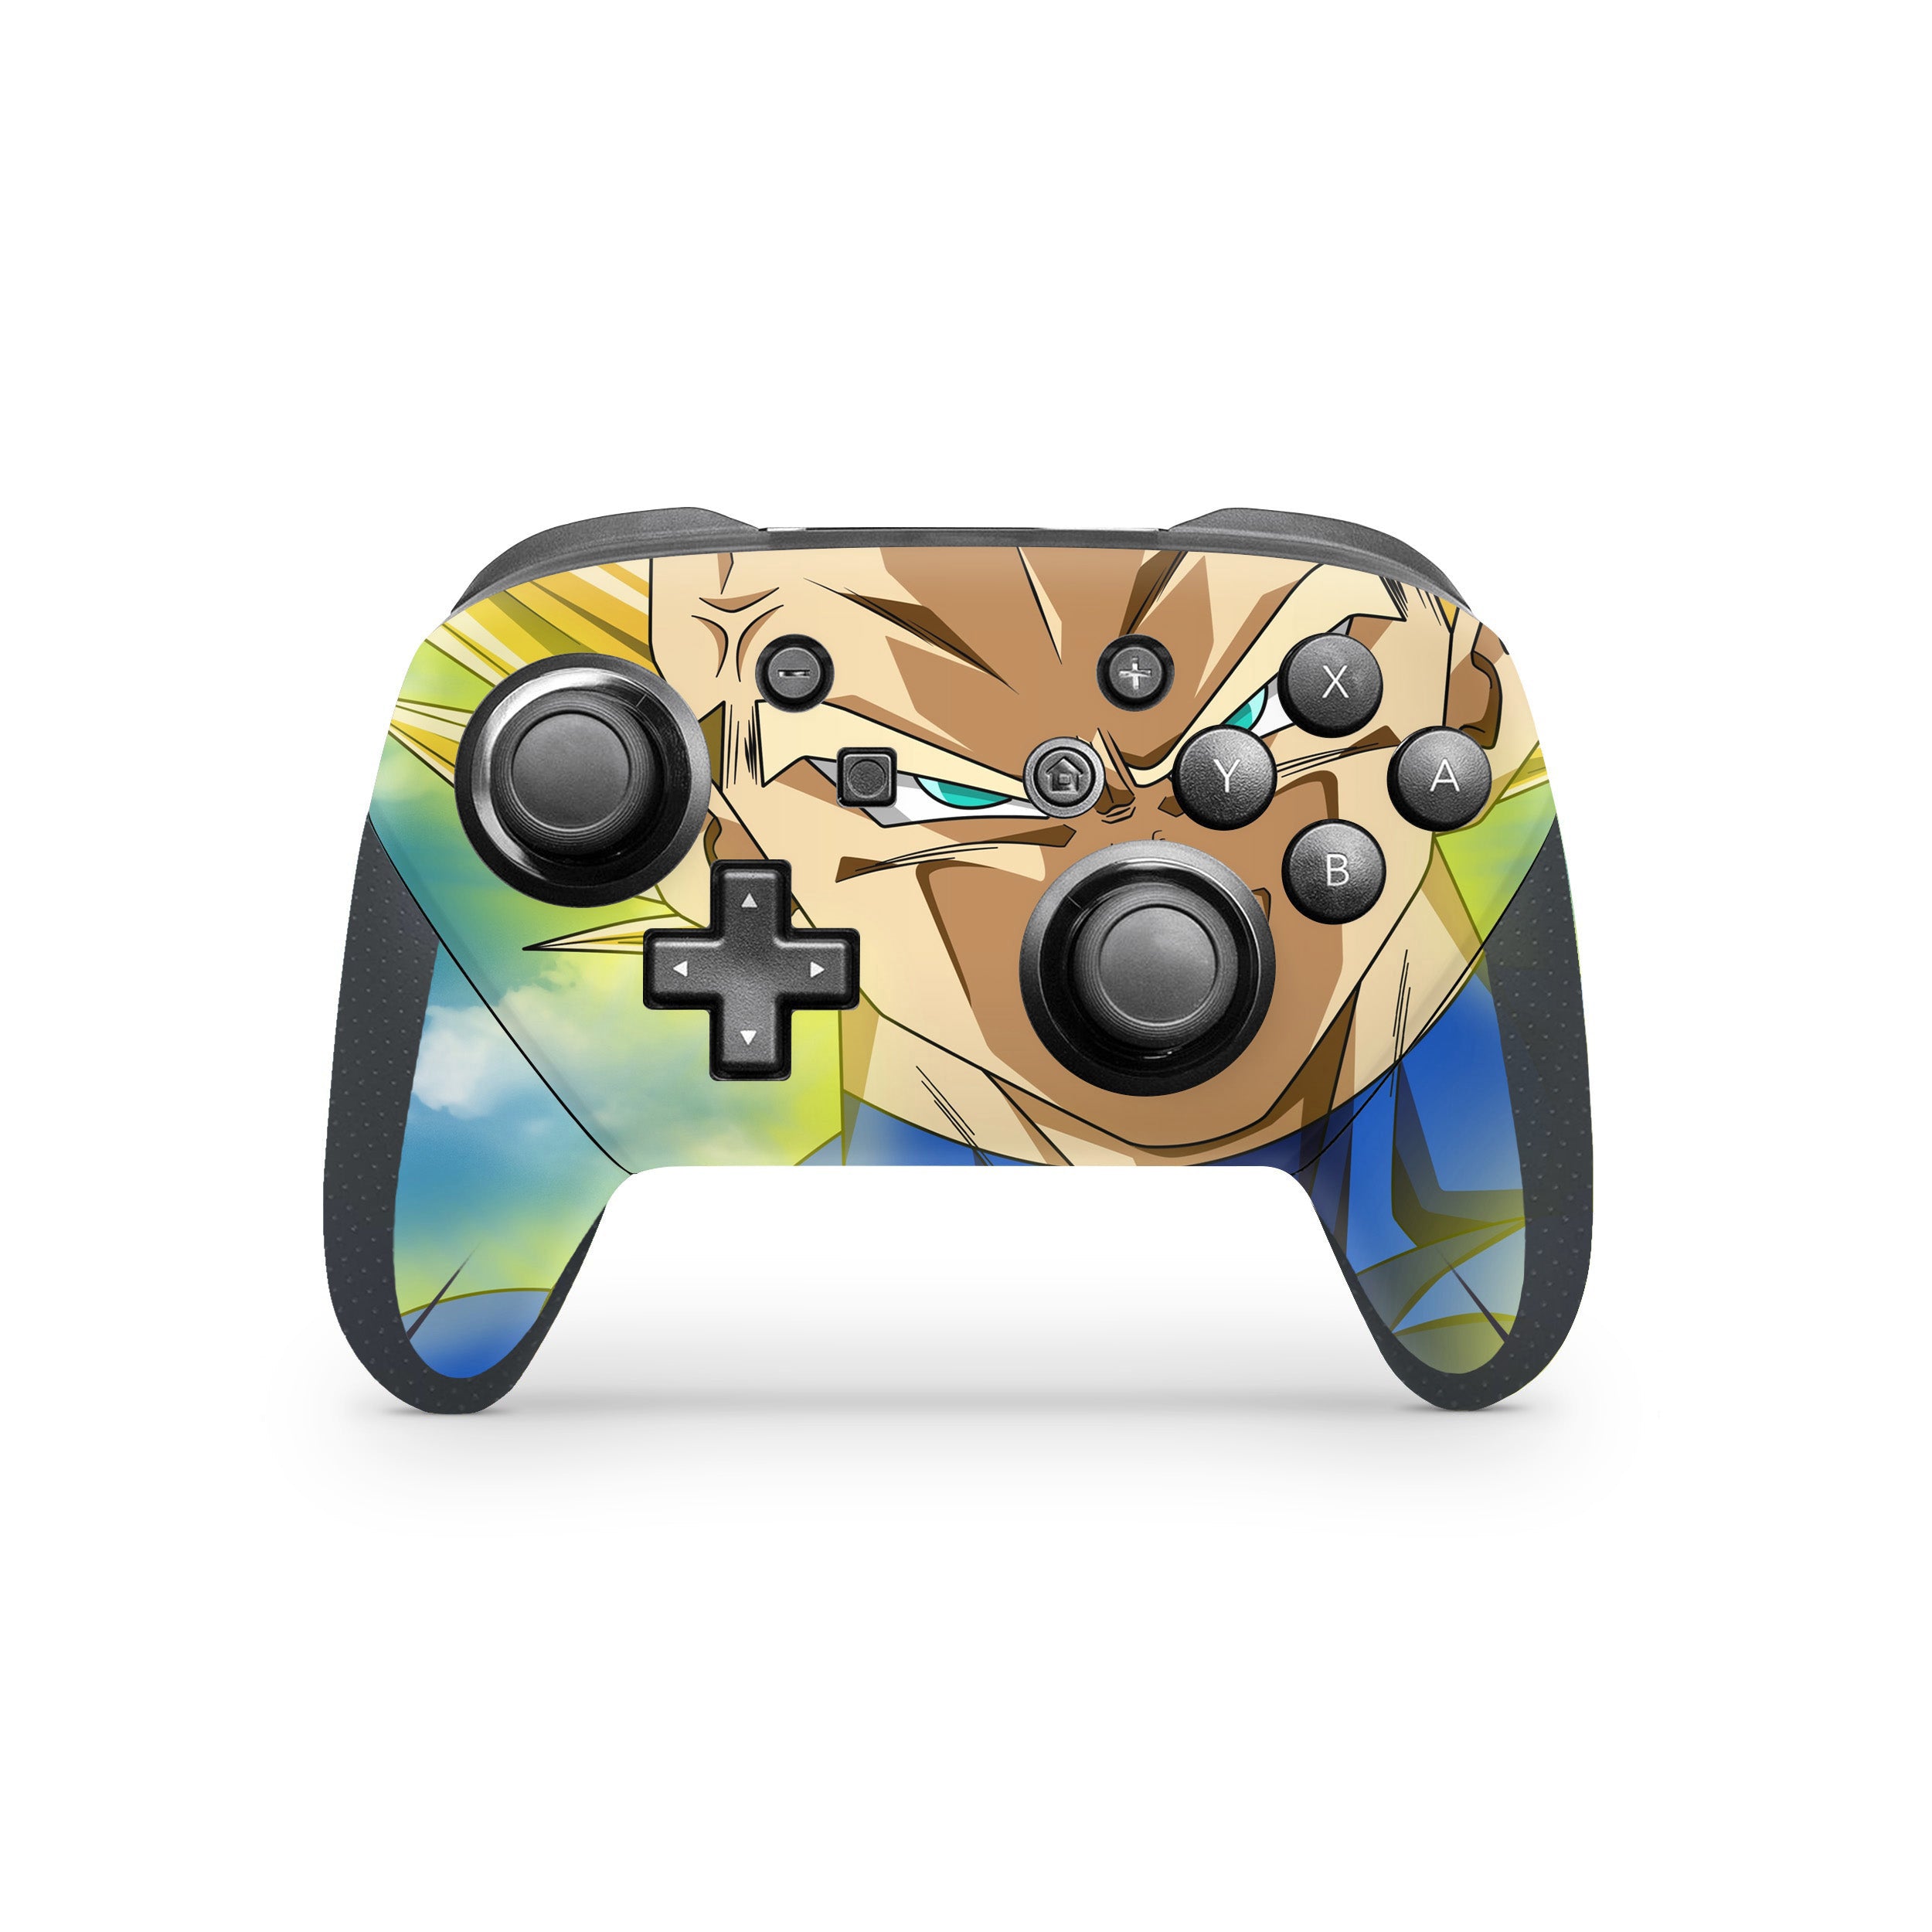 A video game skin featuring a Dragon Ball Z Vegeta design for the Switch Pro Controller.